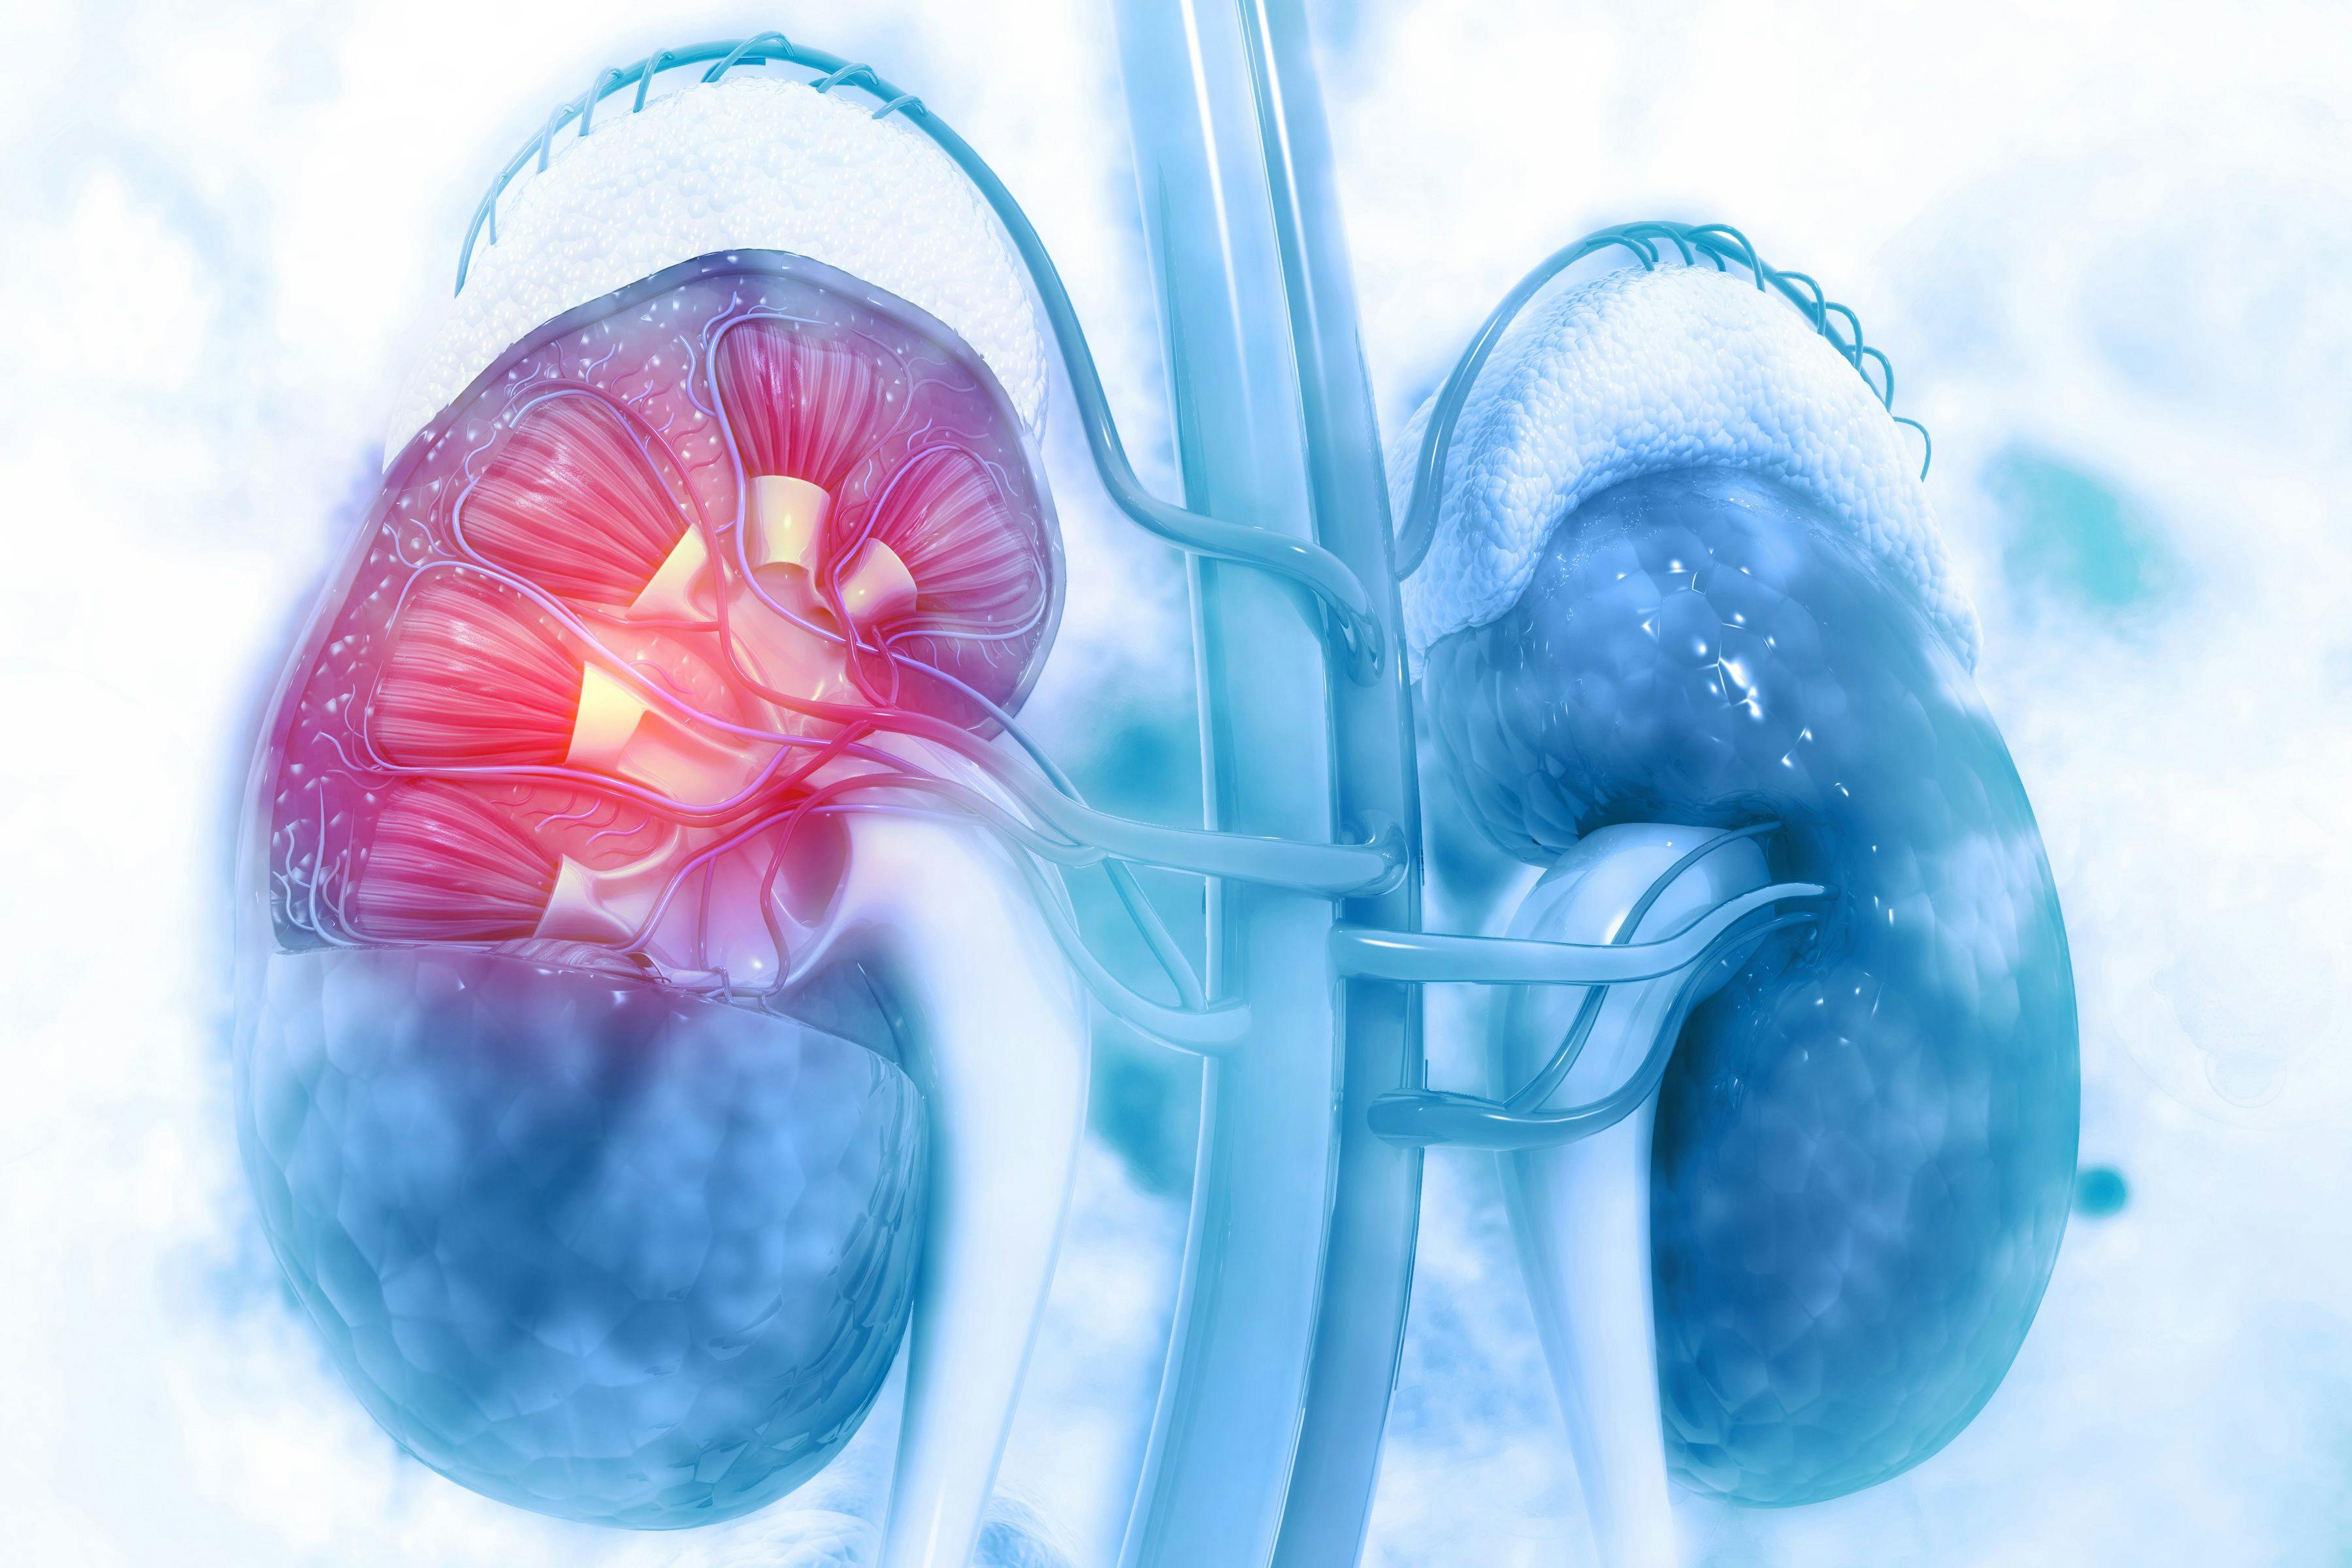 Patients with advanced renal cell carcinoma experienced improvements in both progression-free and overall survival after being treated with first-line immunotherapy vs sunitinib, although the benefit is yet to be determined in those with favorable-risk disease.